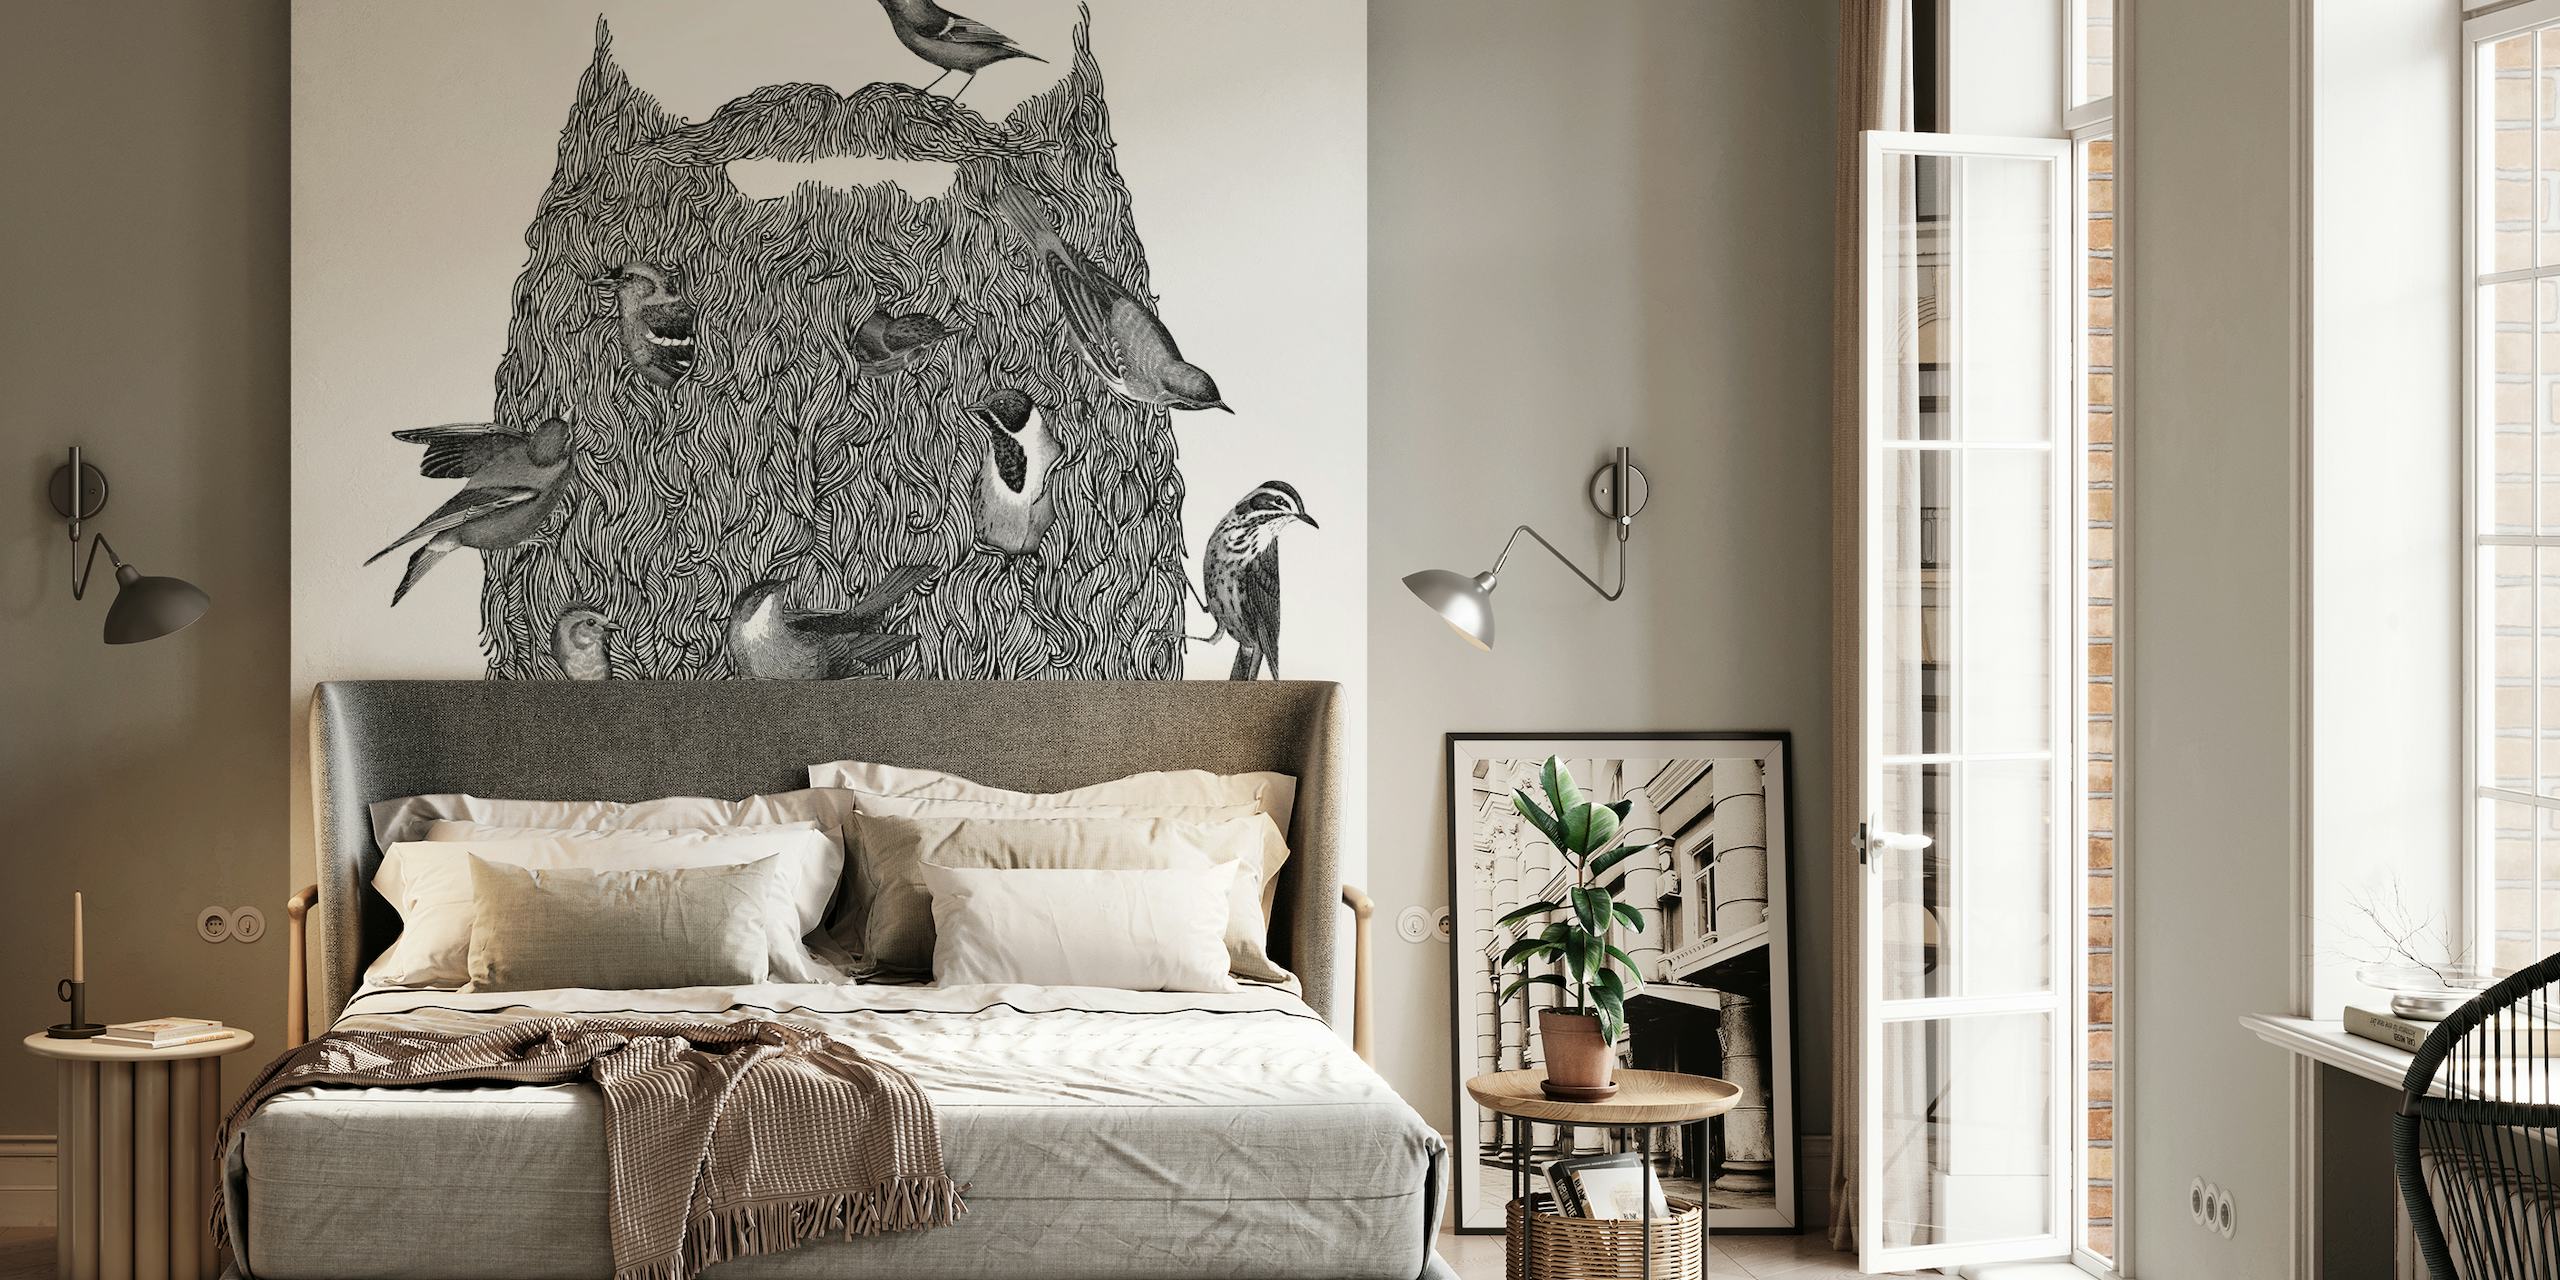 Graphic wall mural depicting birds in a beard-like formation in black and white